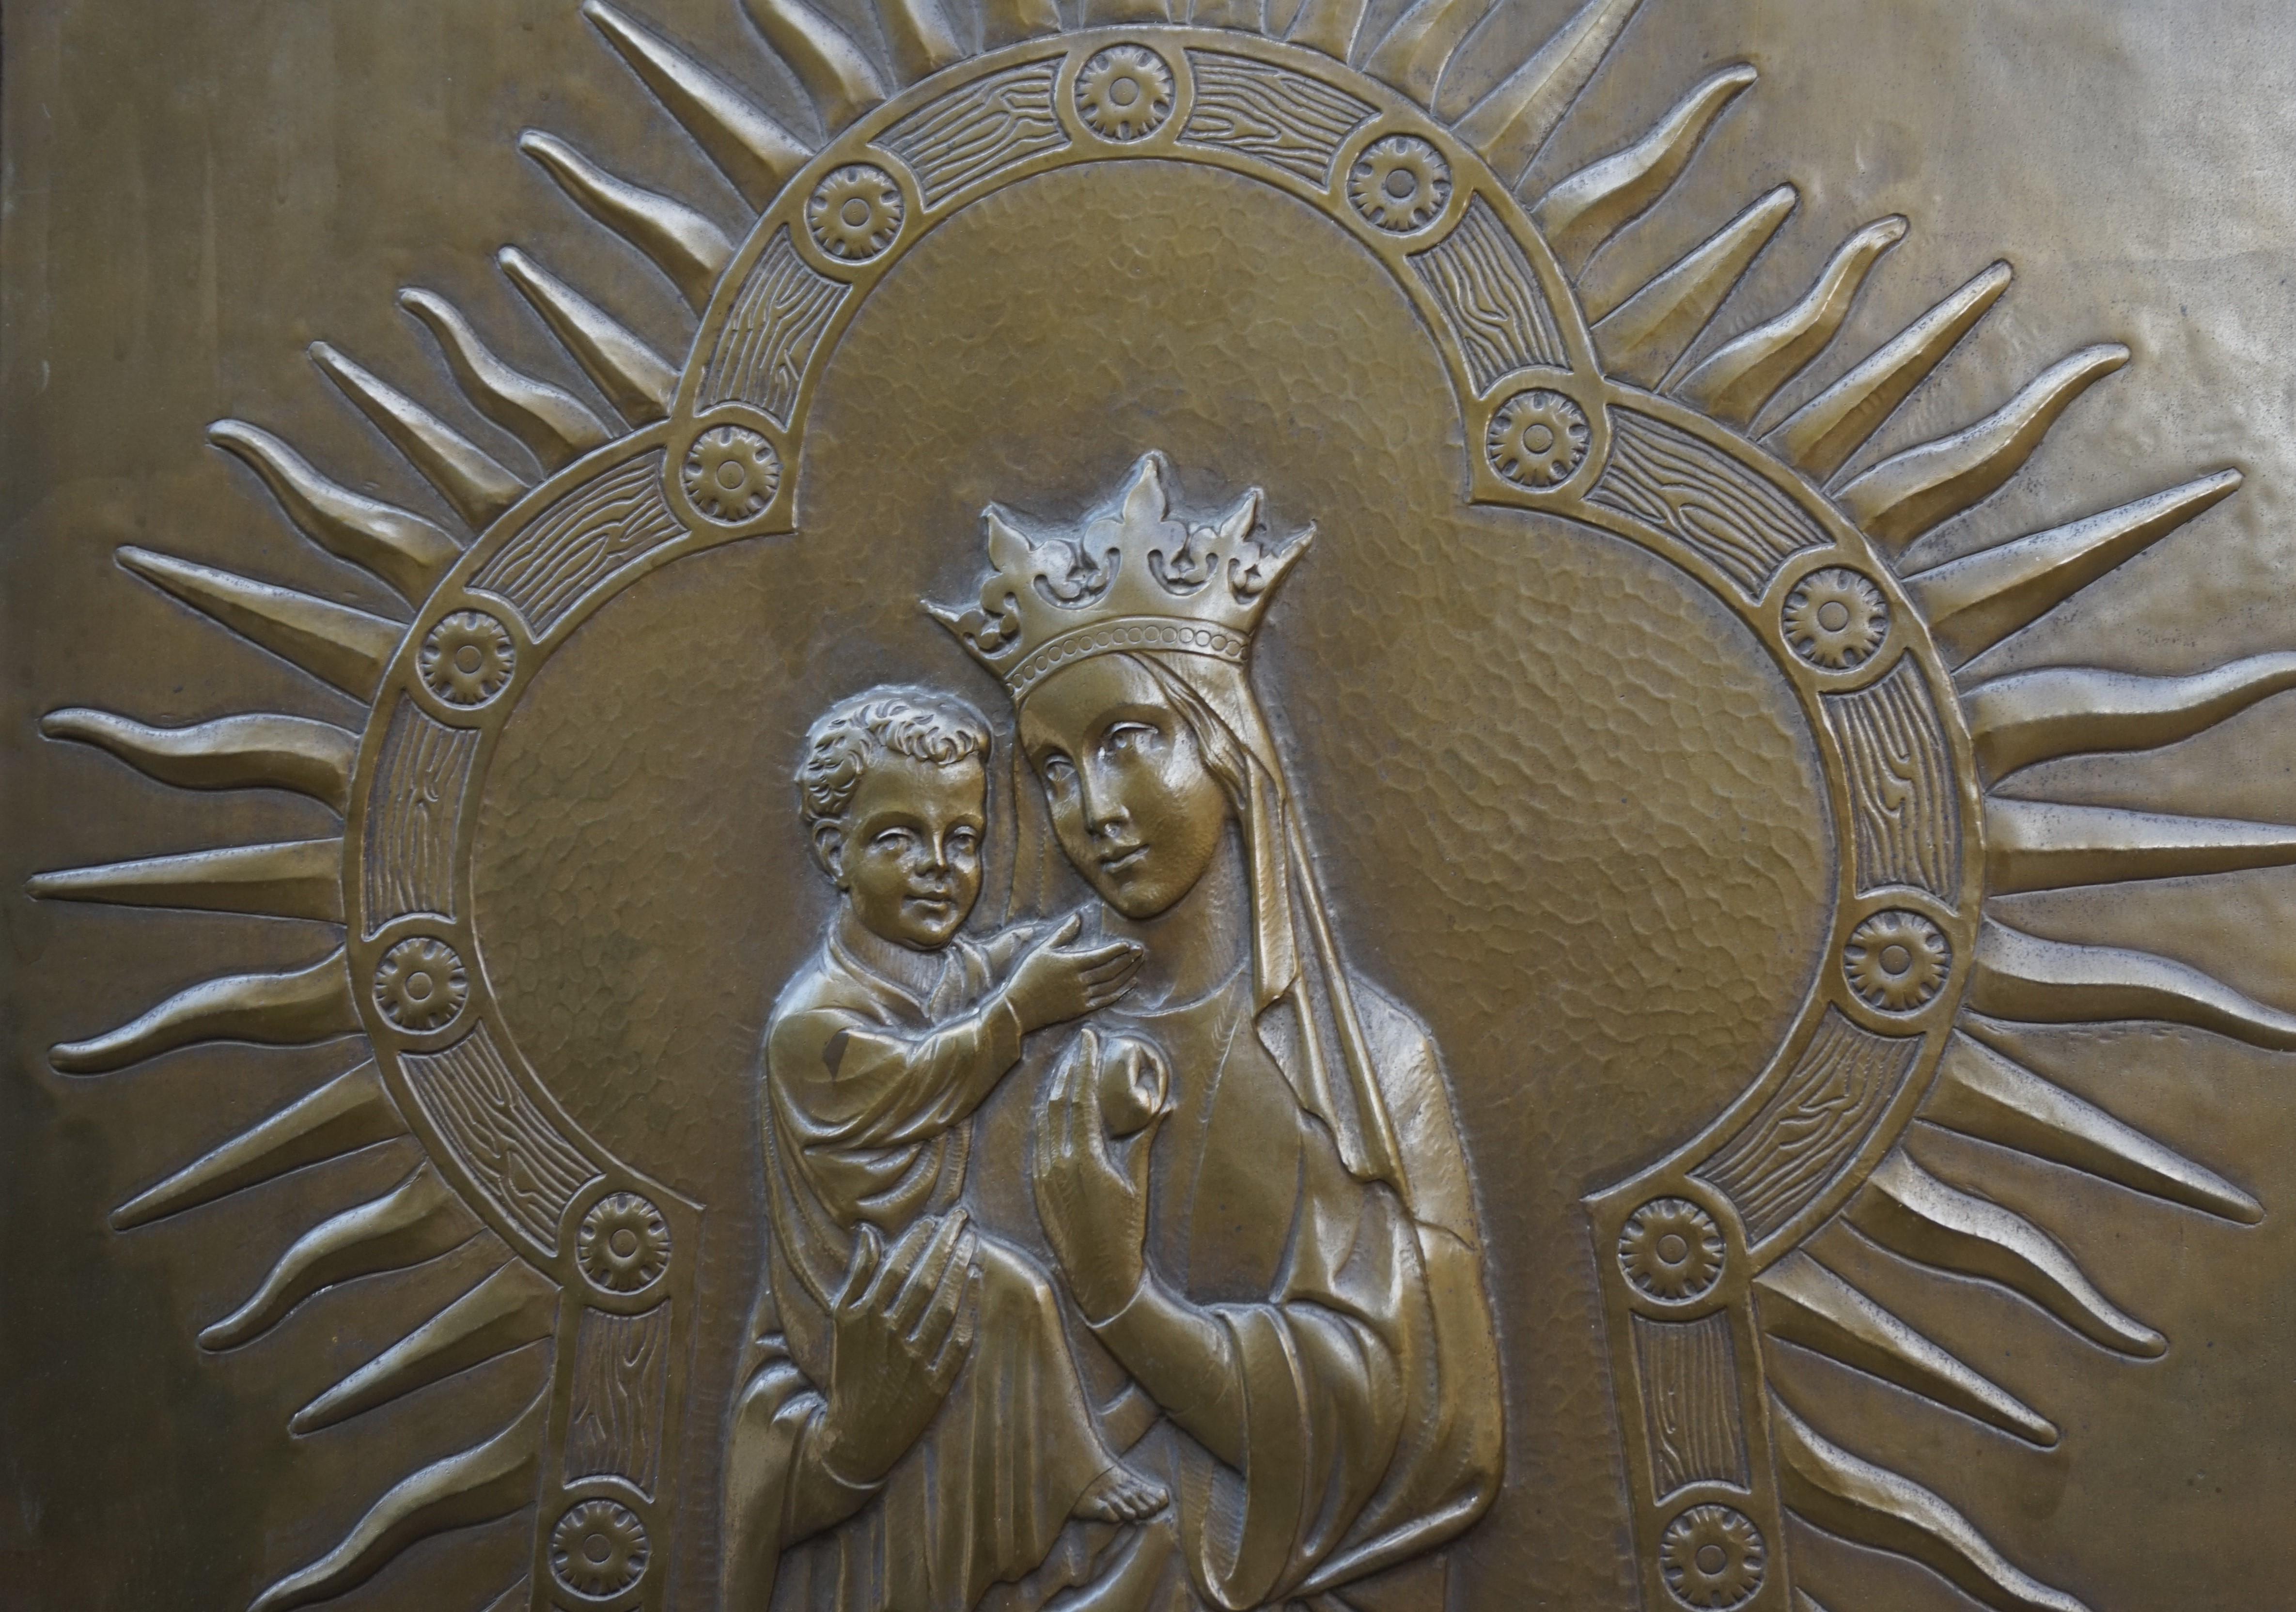 Embossed Antique Mary and Child Jesus Gothic Revival Brass Church Wall Plaque / Sculpture